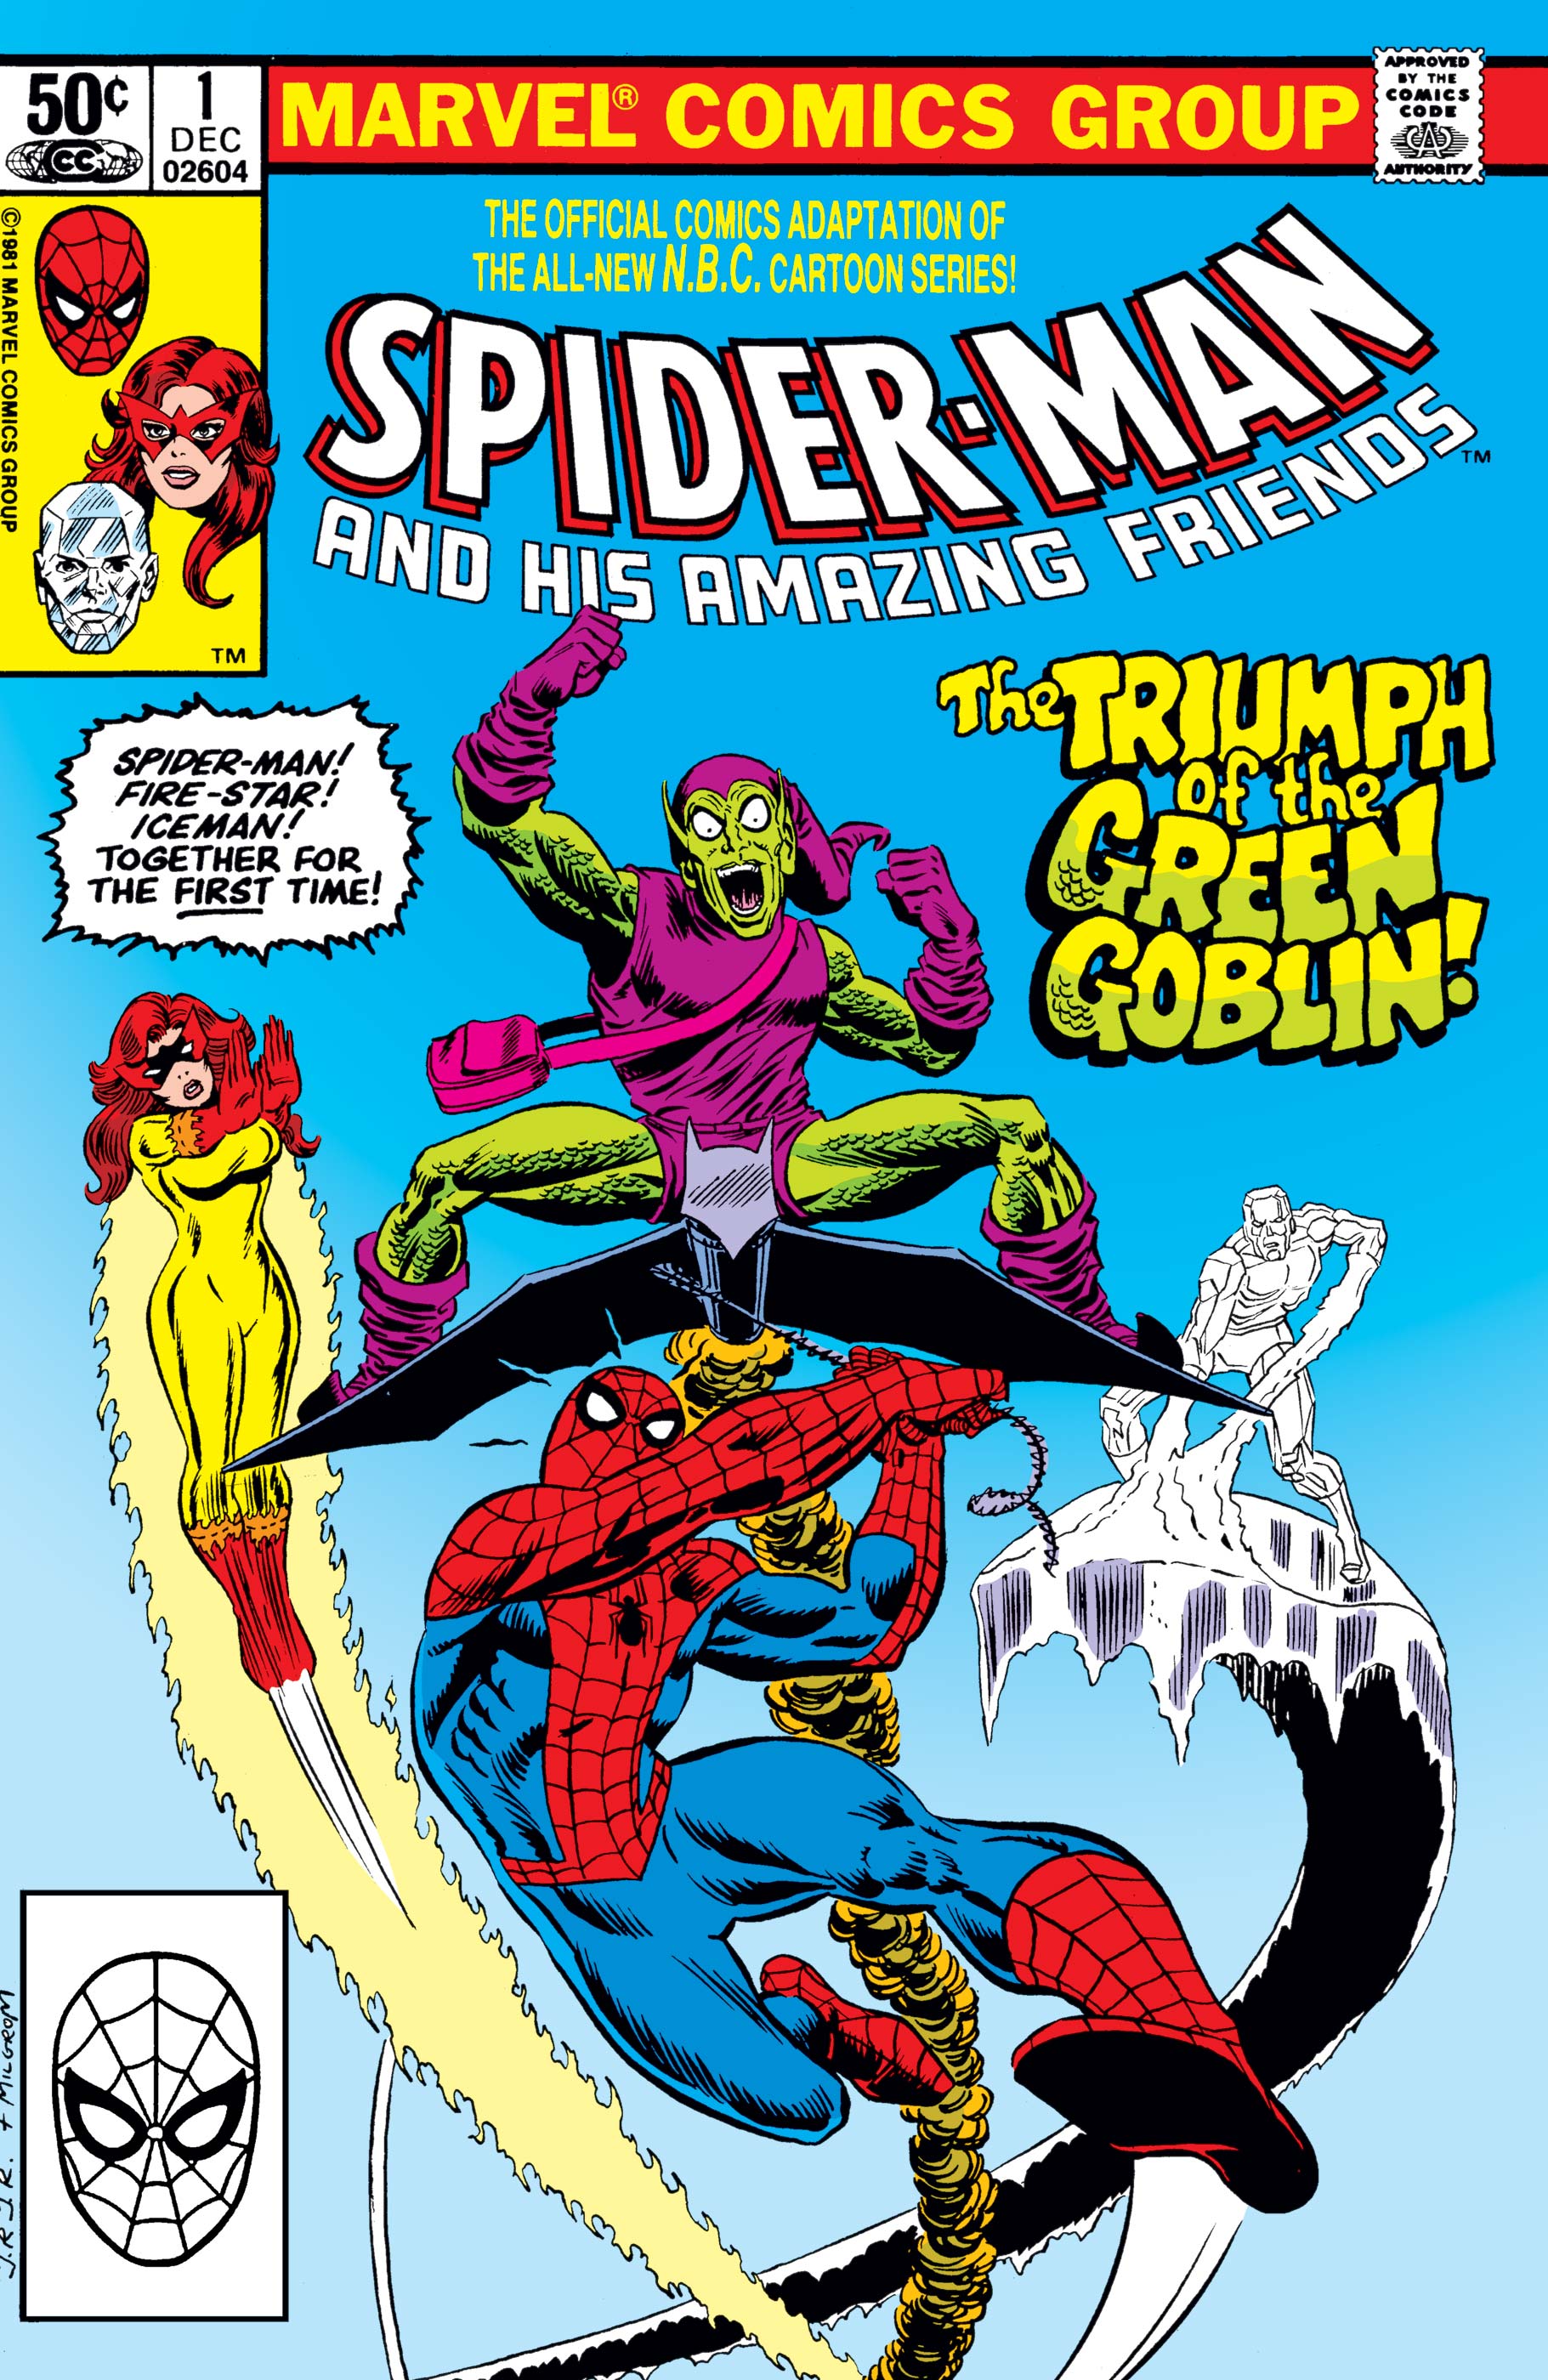 Spider-Man and His Amazing Friends (1981) #1, Comic Issues